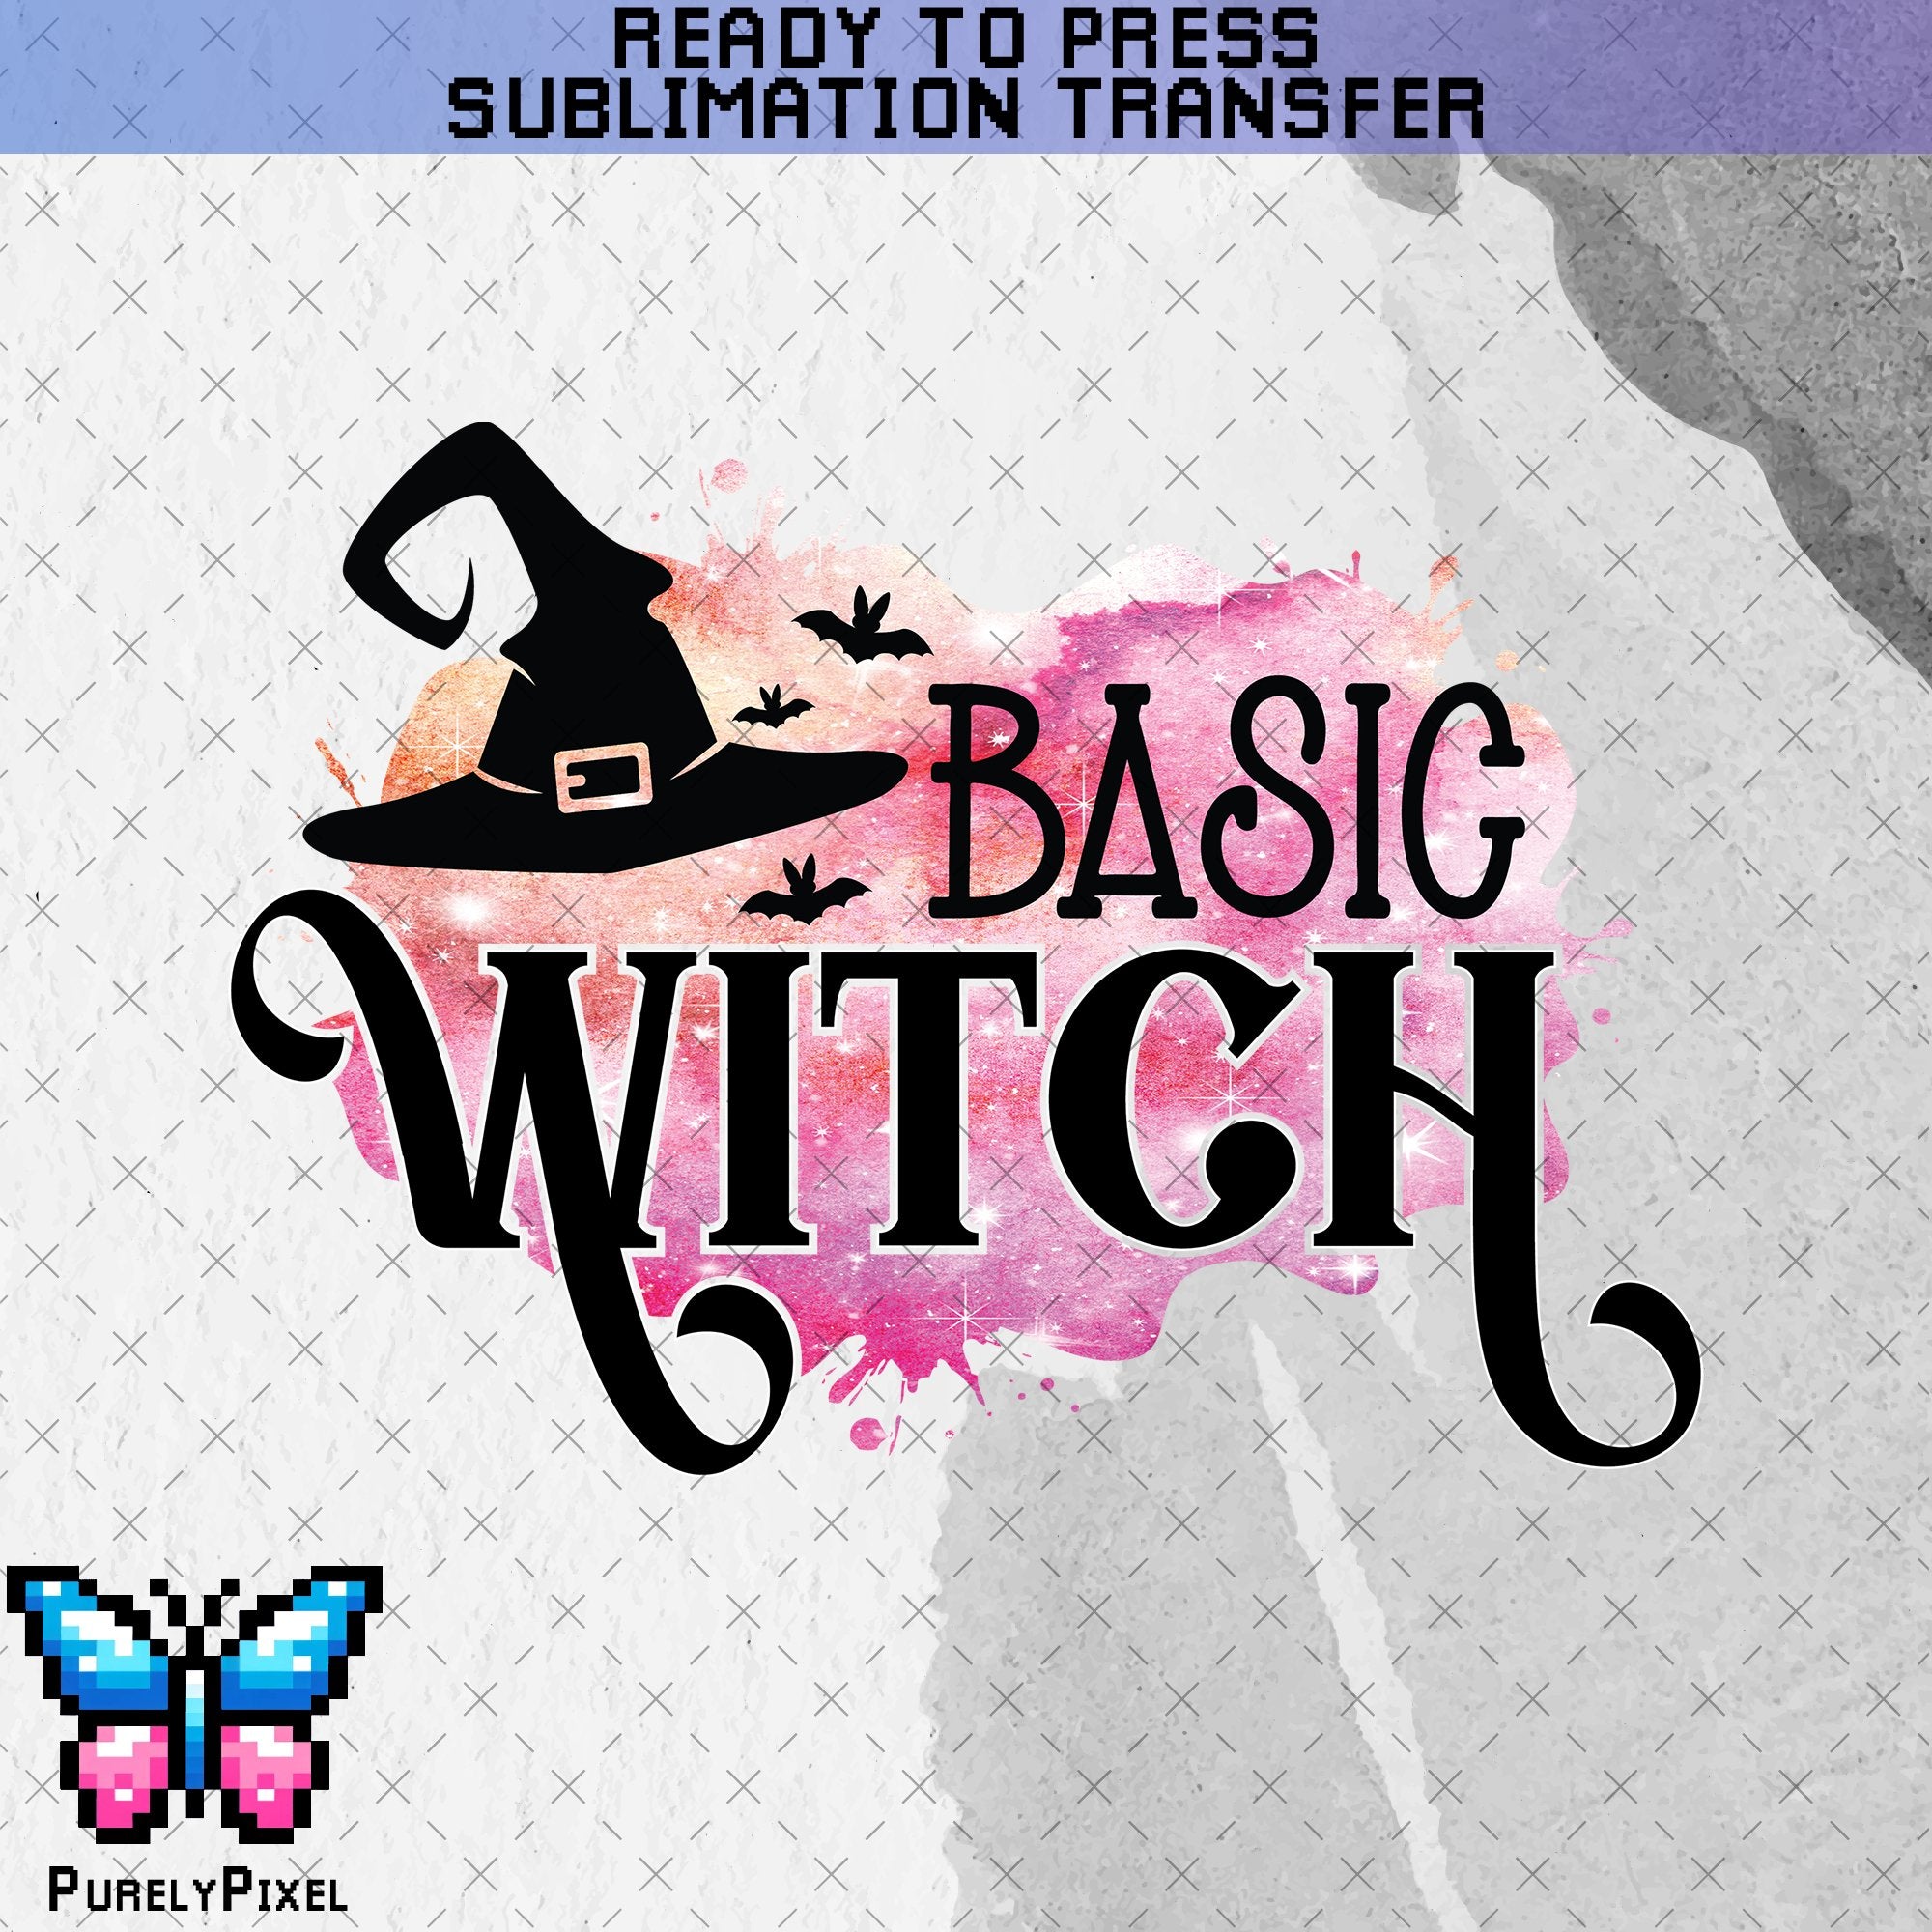 Basic Witch Halloween Hat with Bats Sublimation Transfer | Funny and Humorous Saying | Halloween Sublimation Design | Ready to Press | PurelyPixels | Sublimation Transfers